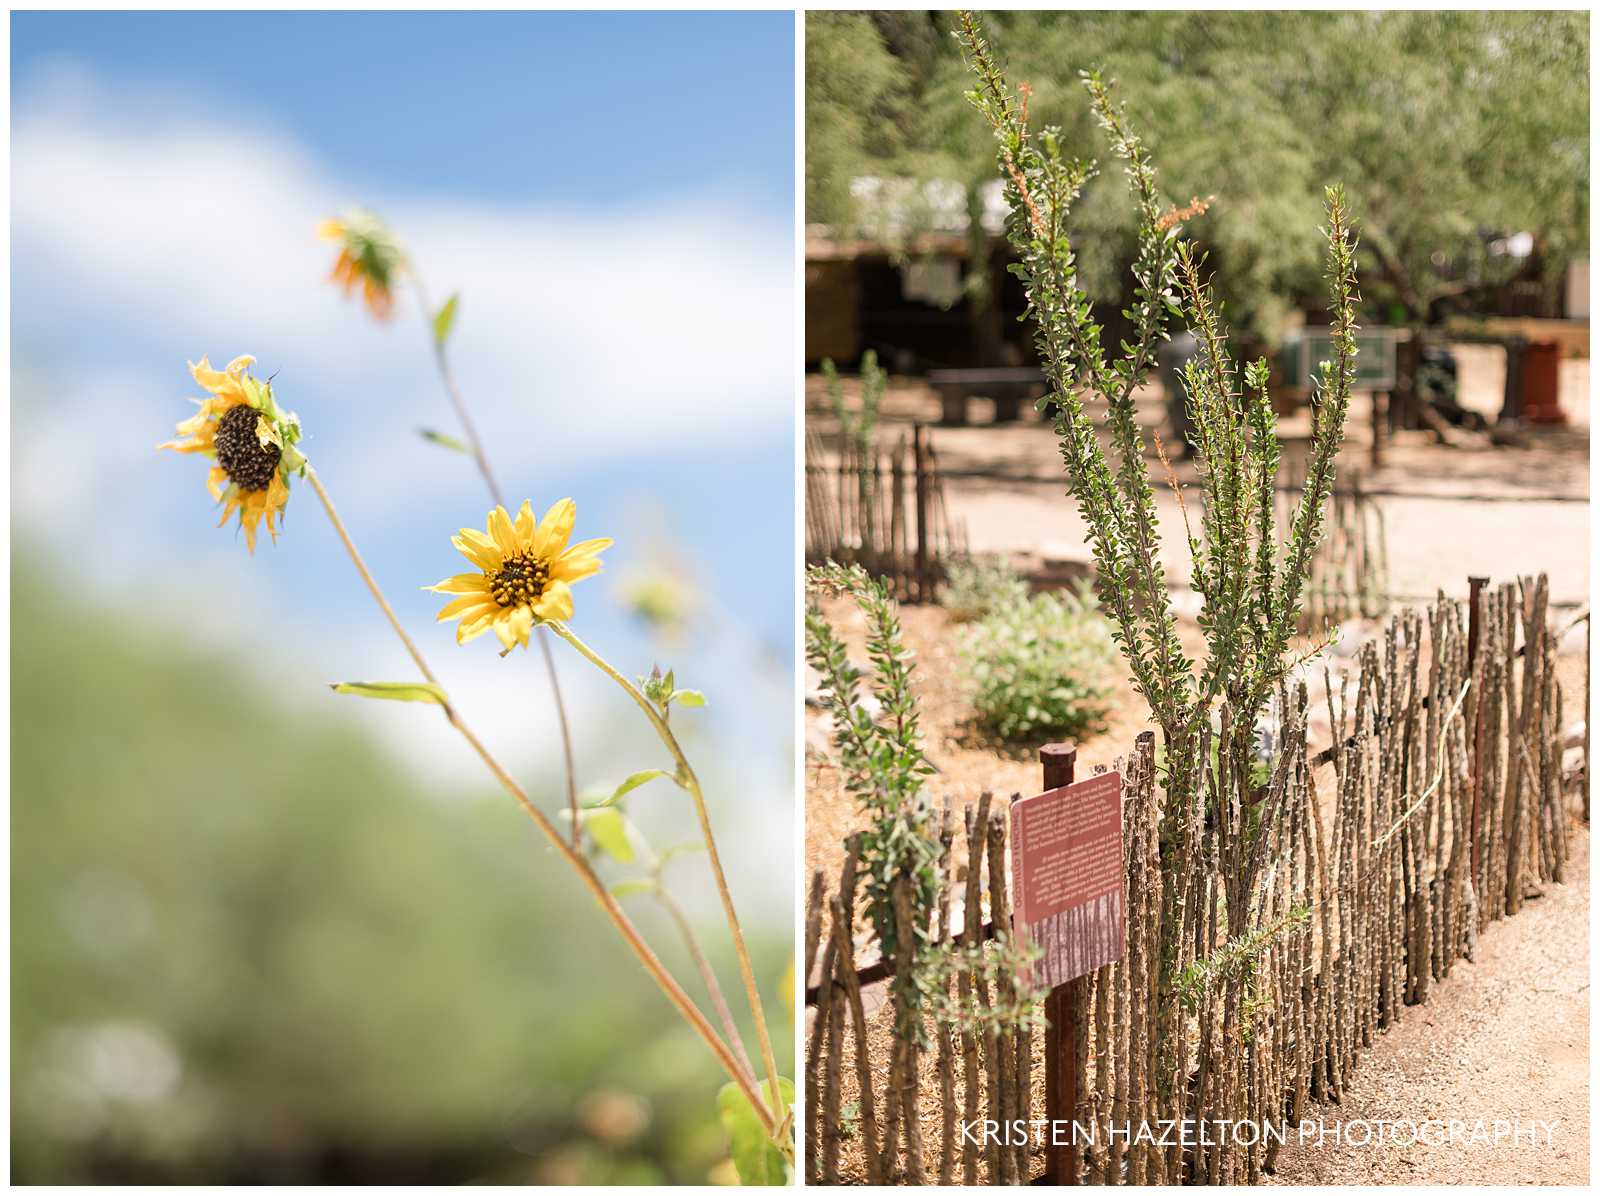 Sunflowers and ocotillo fence at the Tucson Botanical Garden